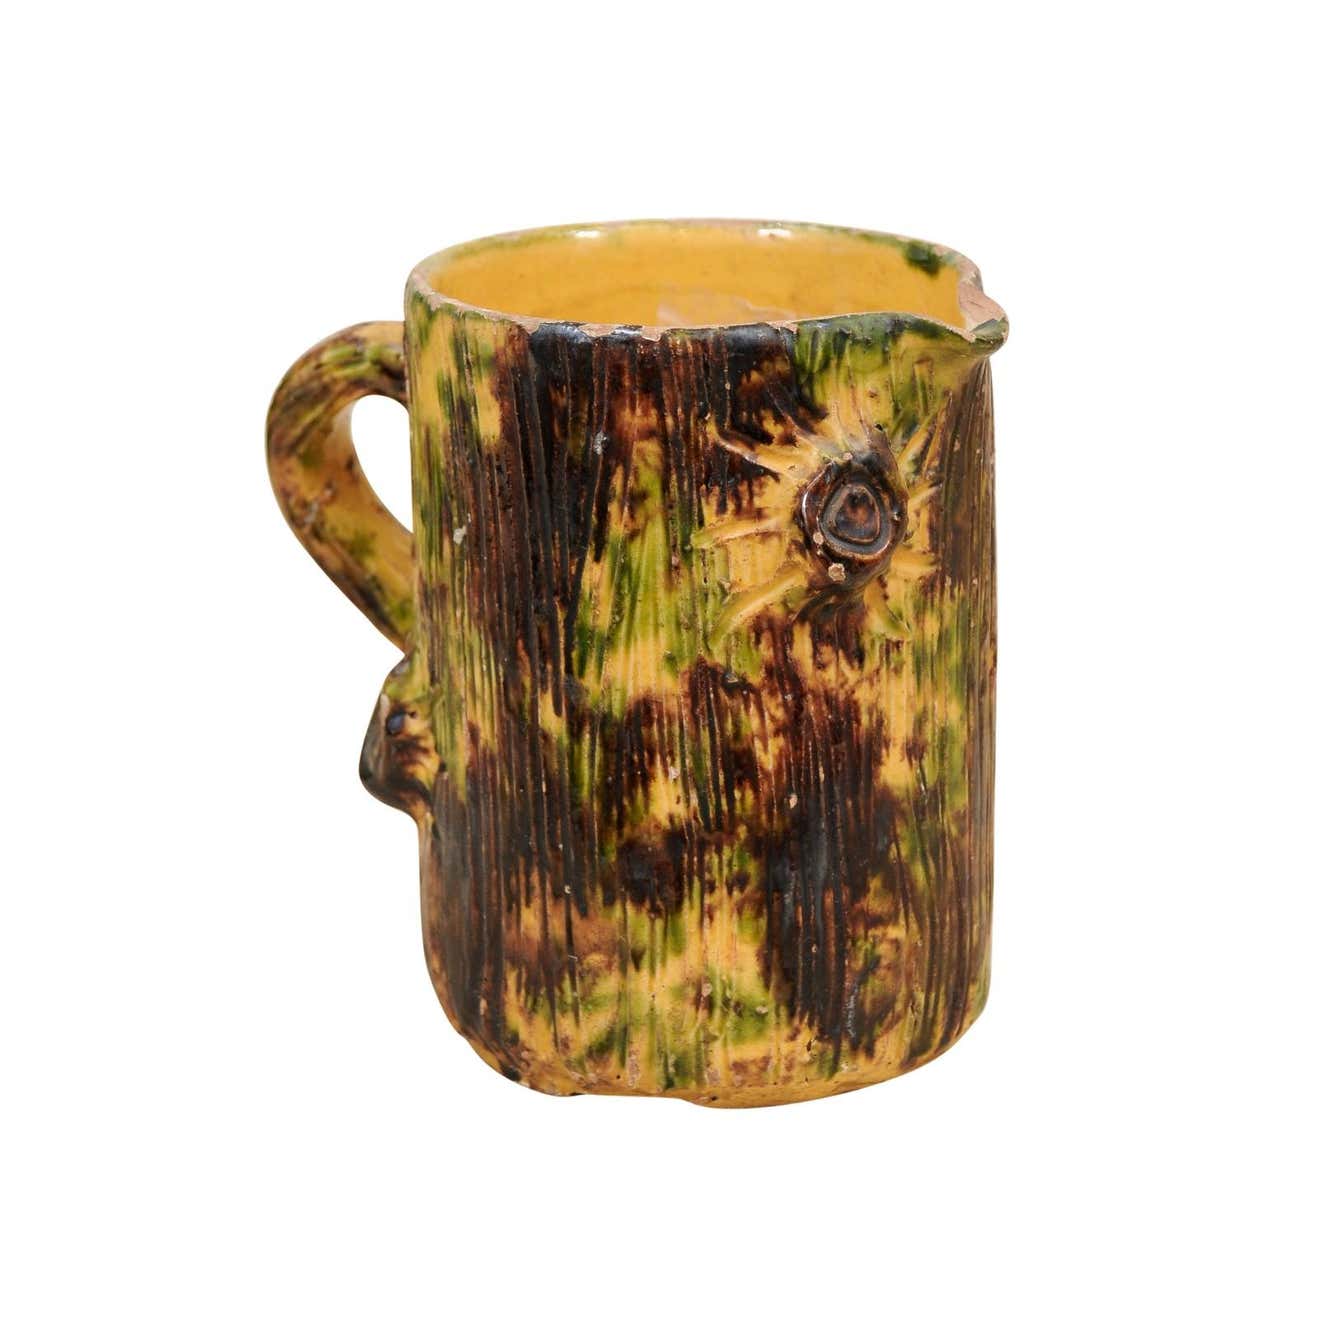 French Brown Glazed Pottery Pitcher with Yellow and Green Textured Accents